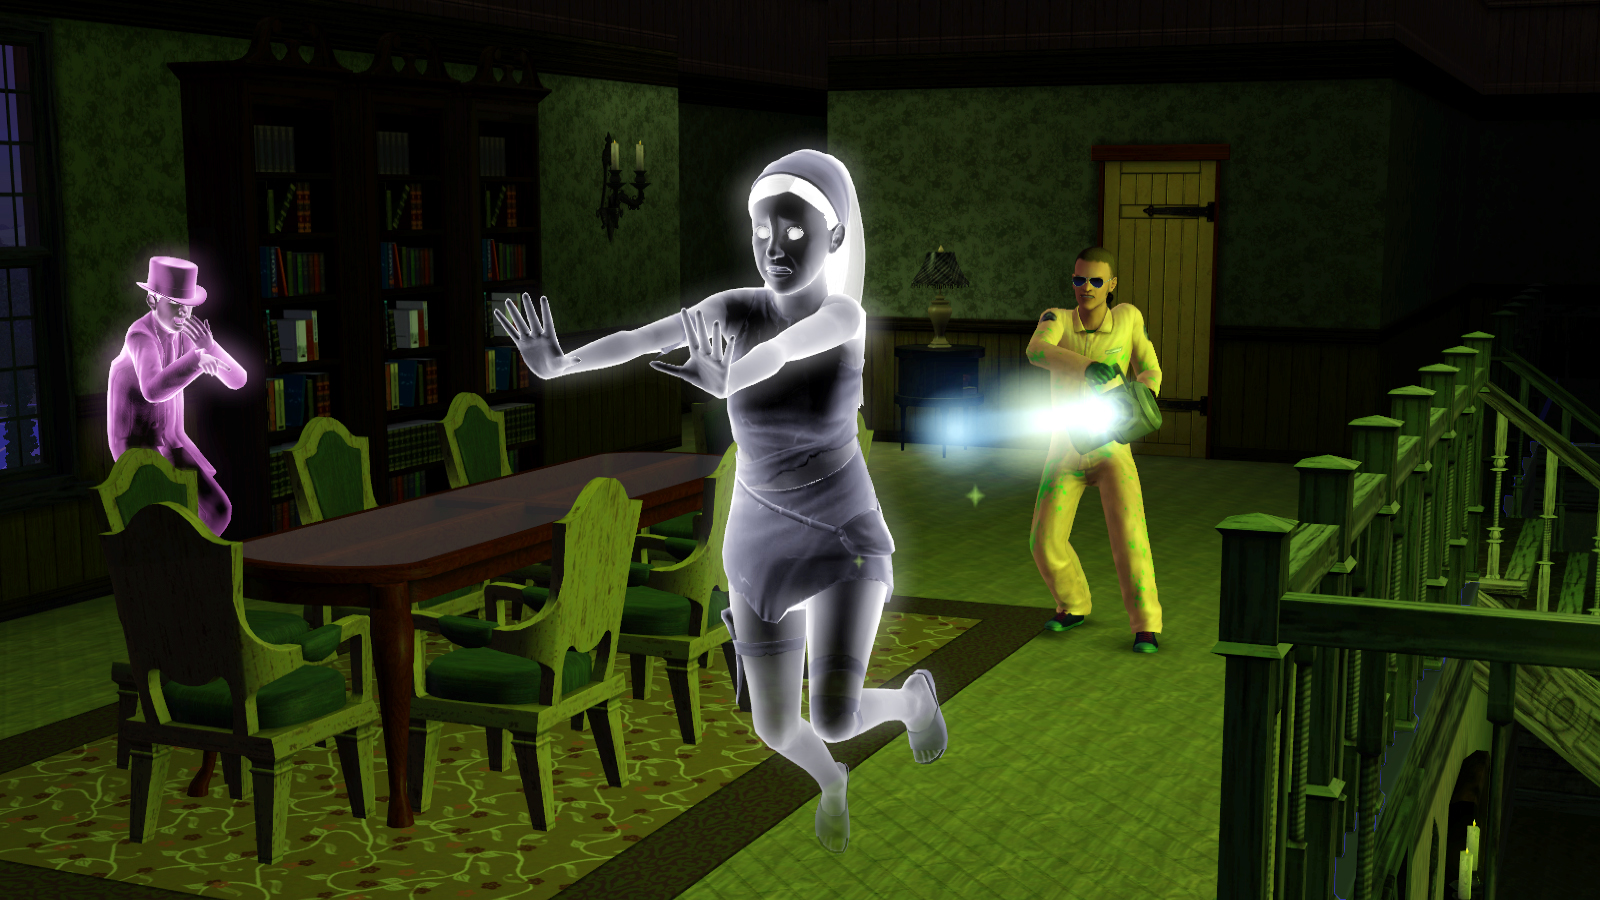 http://images3.wikia.nocookie.net/__cb20100528134643/sims/images/3/33/Busting_ghosts.jpg